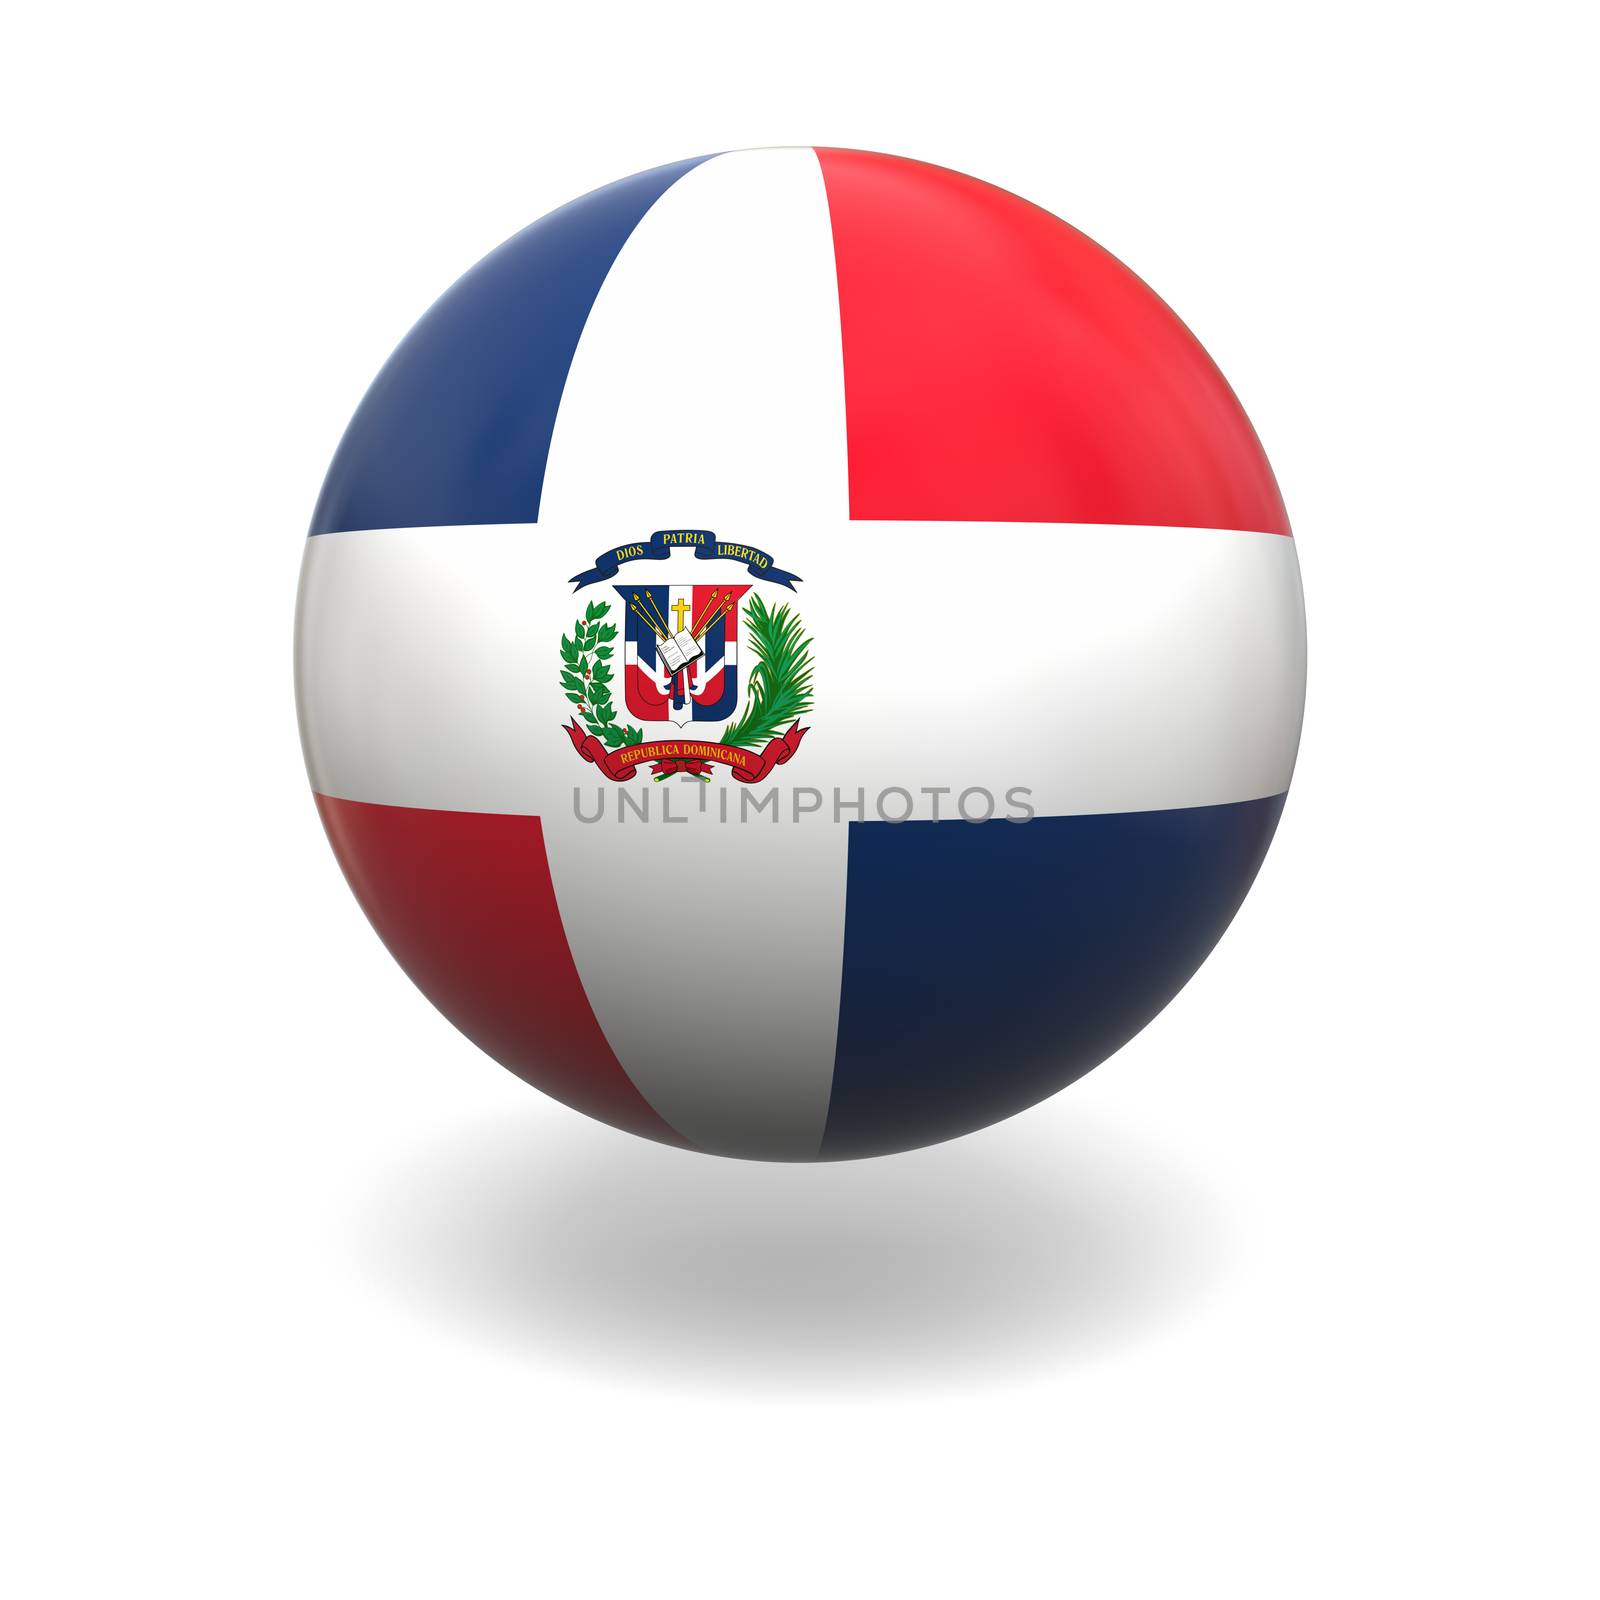 Dominican Republic flag by Harvepino